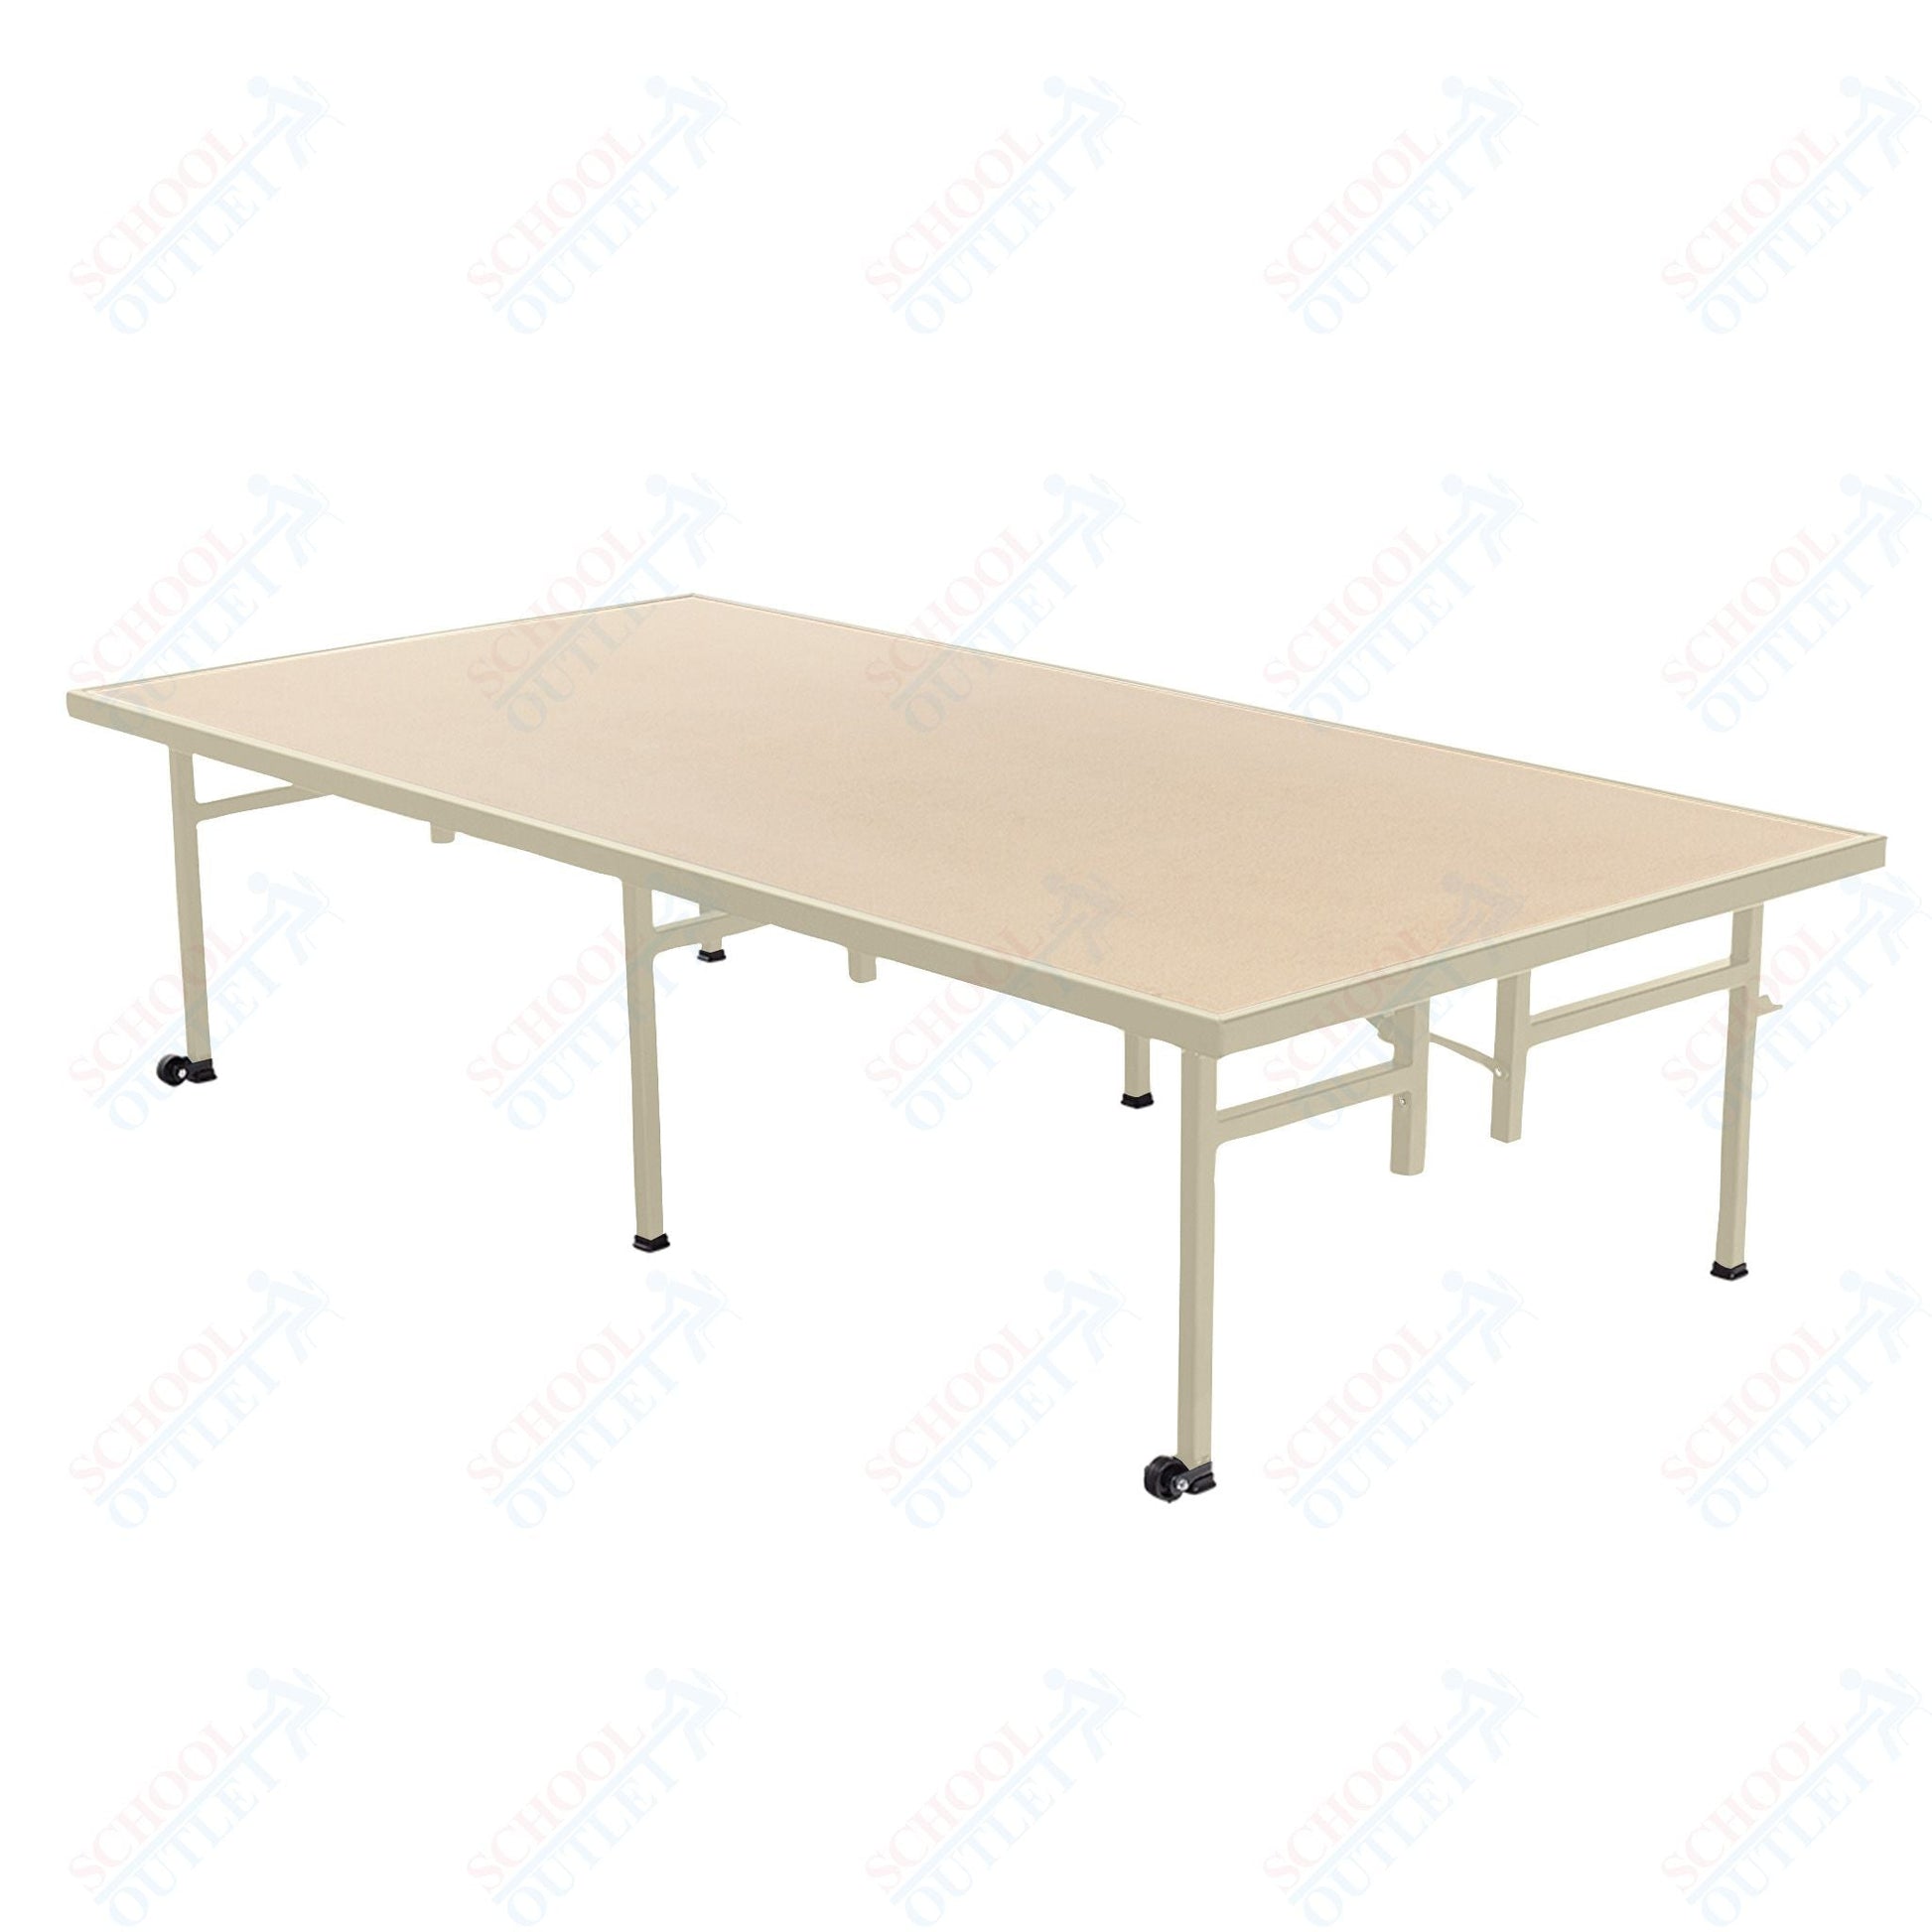 AmTab Fixed Height Stage - Hardboard Top - 36"W x 96"L x 8"H (AmTab AMT - ST3808H) - SchoolOutlet